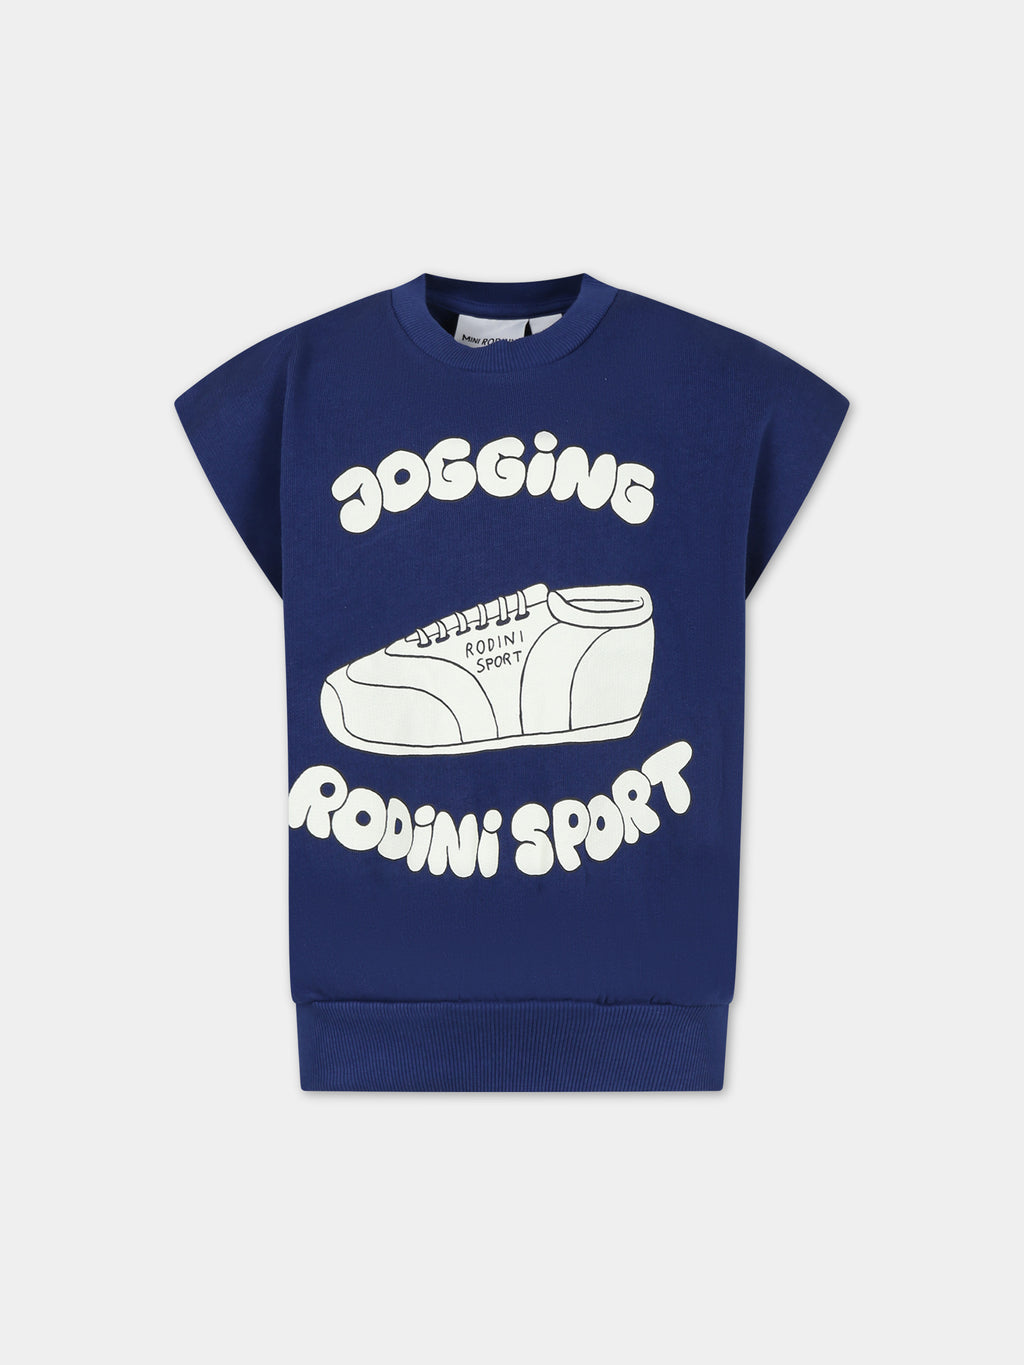 Blue sweatshirt for kids with jogging sneakers print